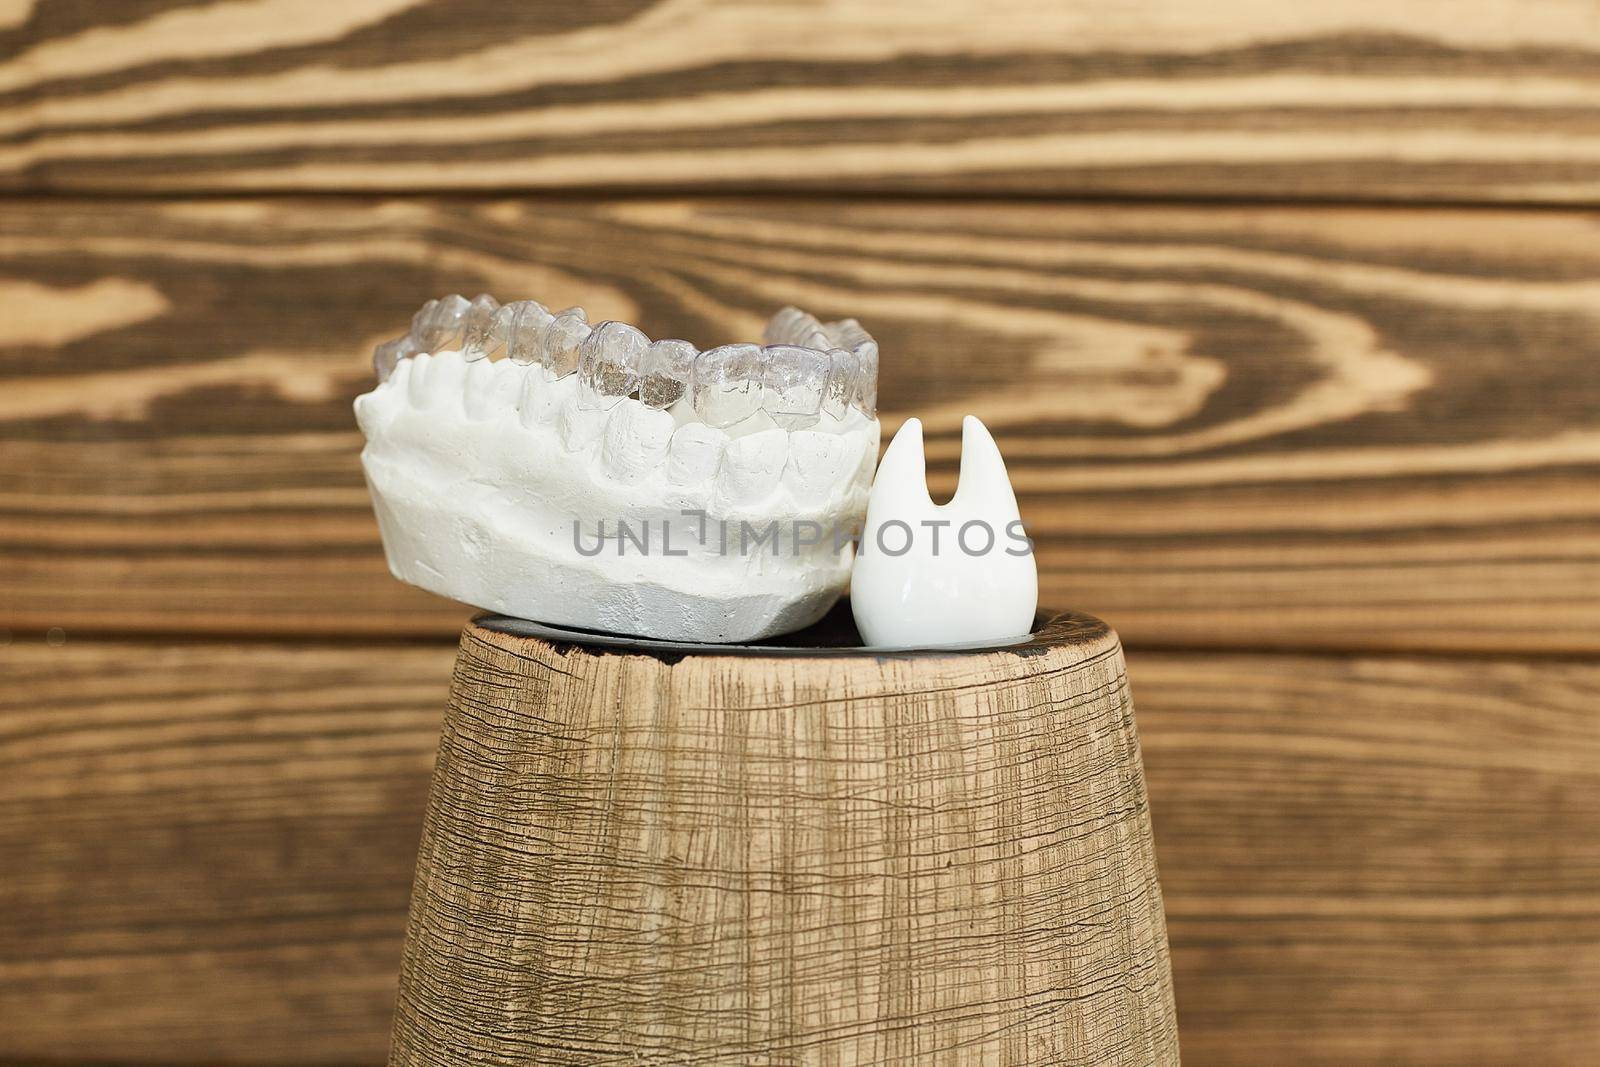 Orthodontic dental theme on a rustic background. Transparent invisible trays or braces for orthodontic dental treatment.